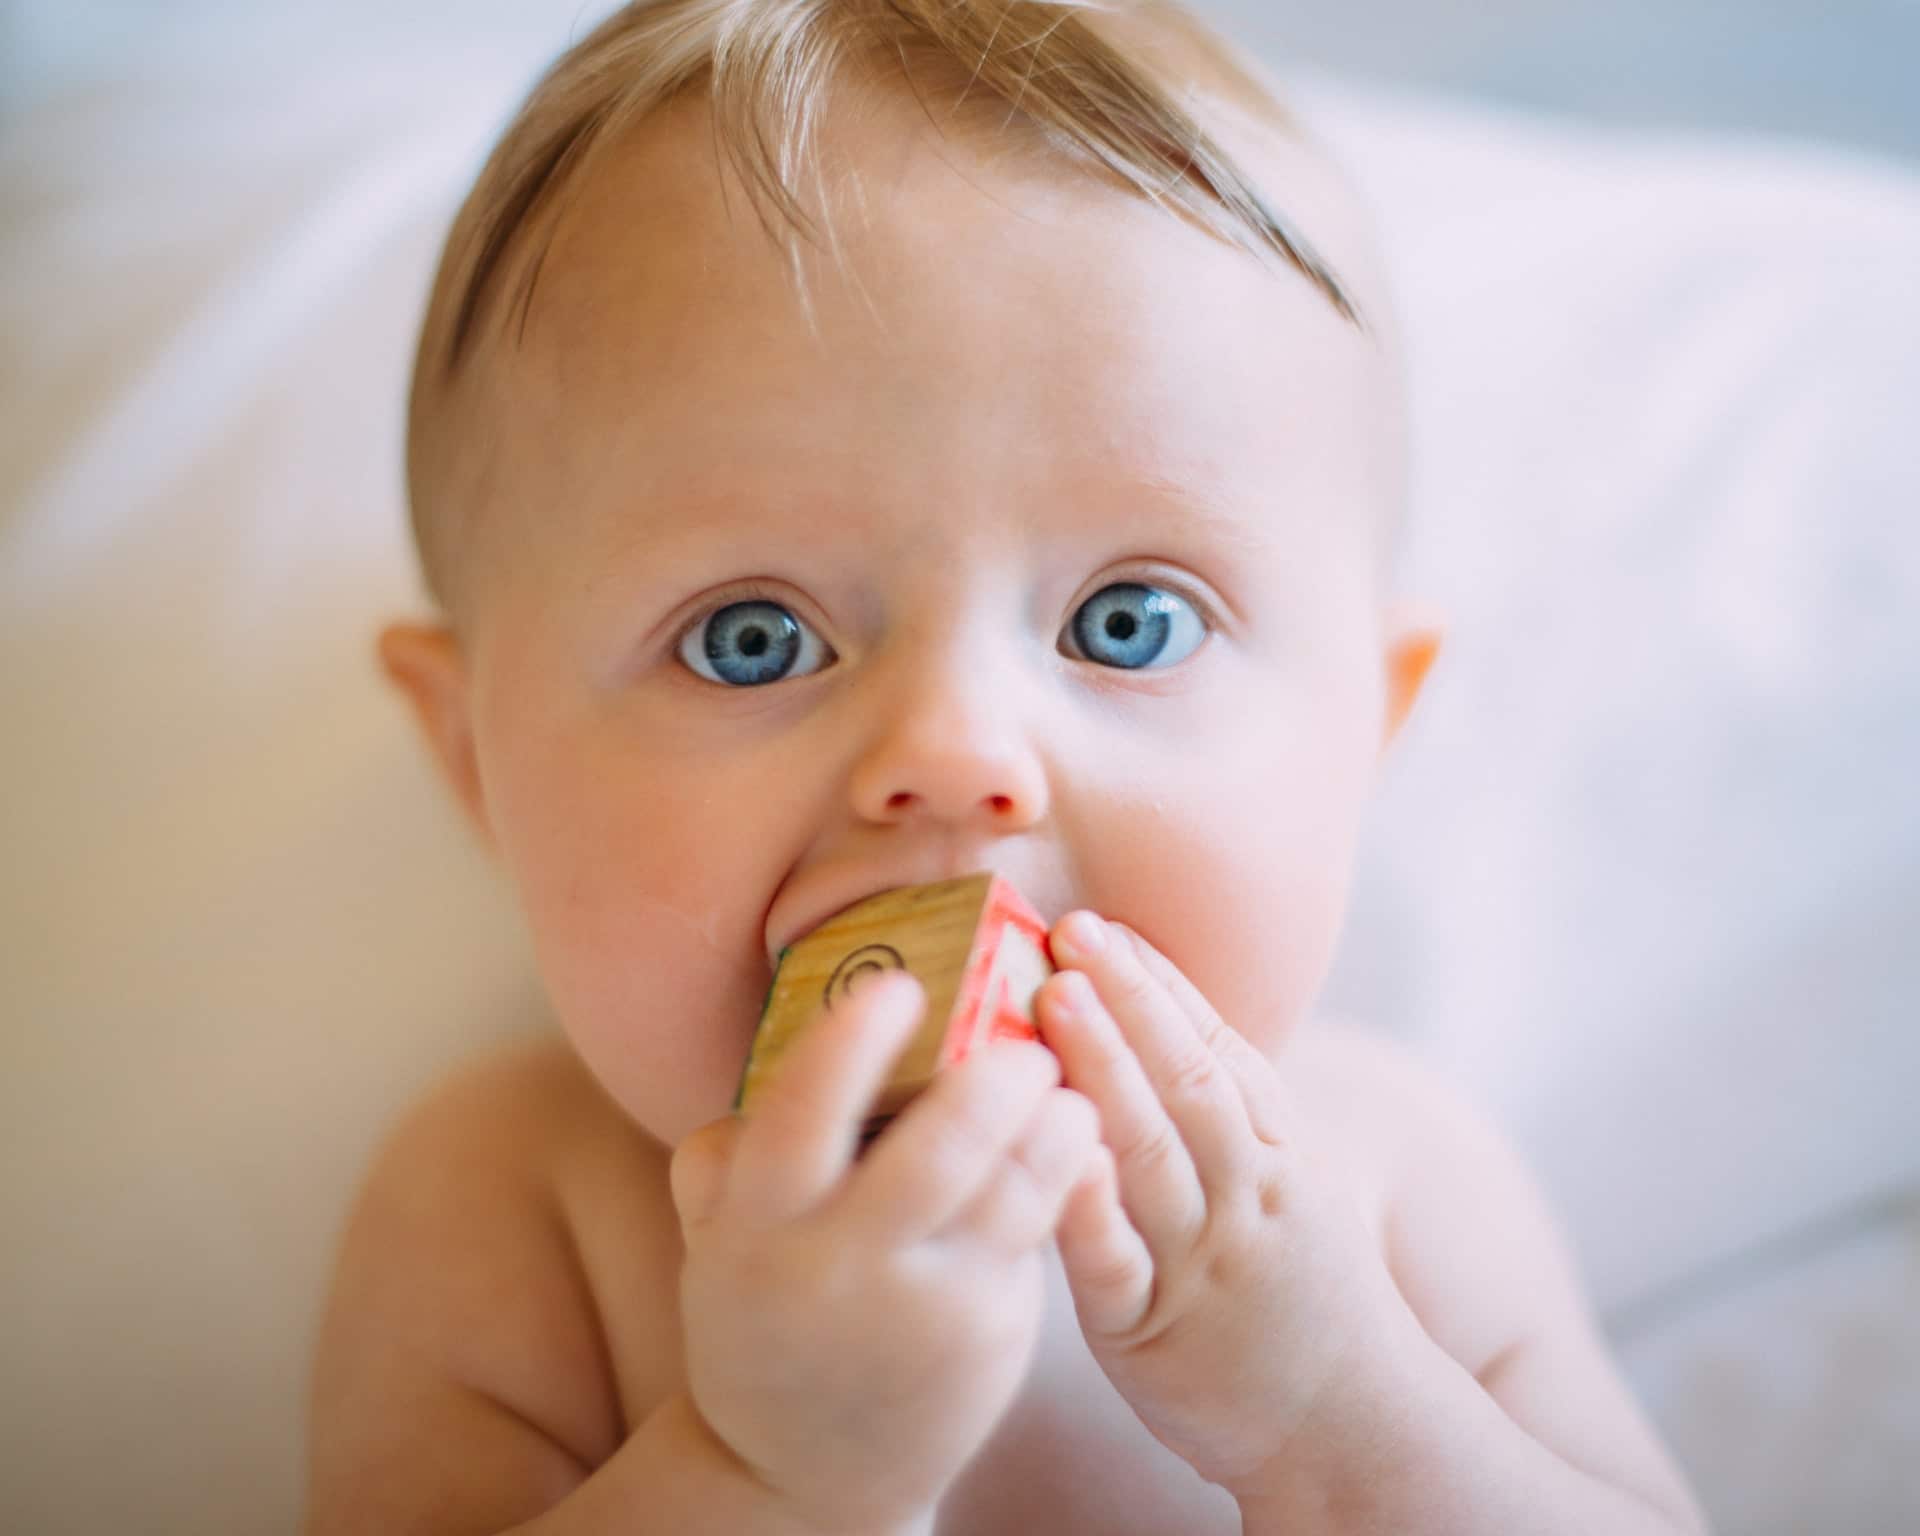 Baby dental care - baby with toy held to/near the mouth.